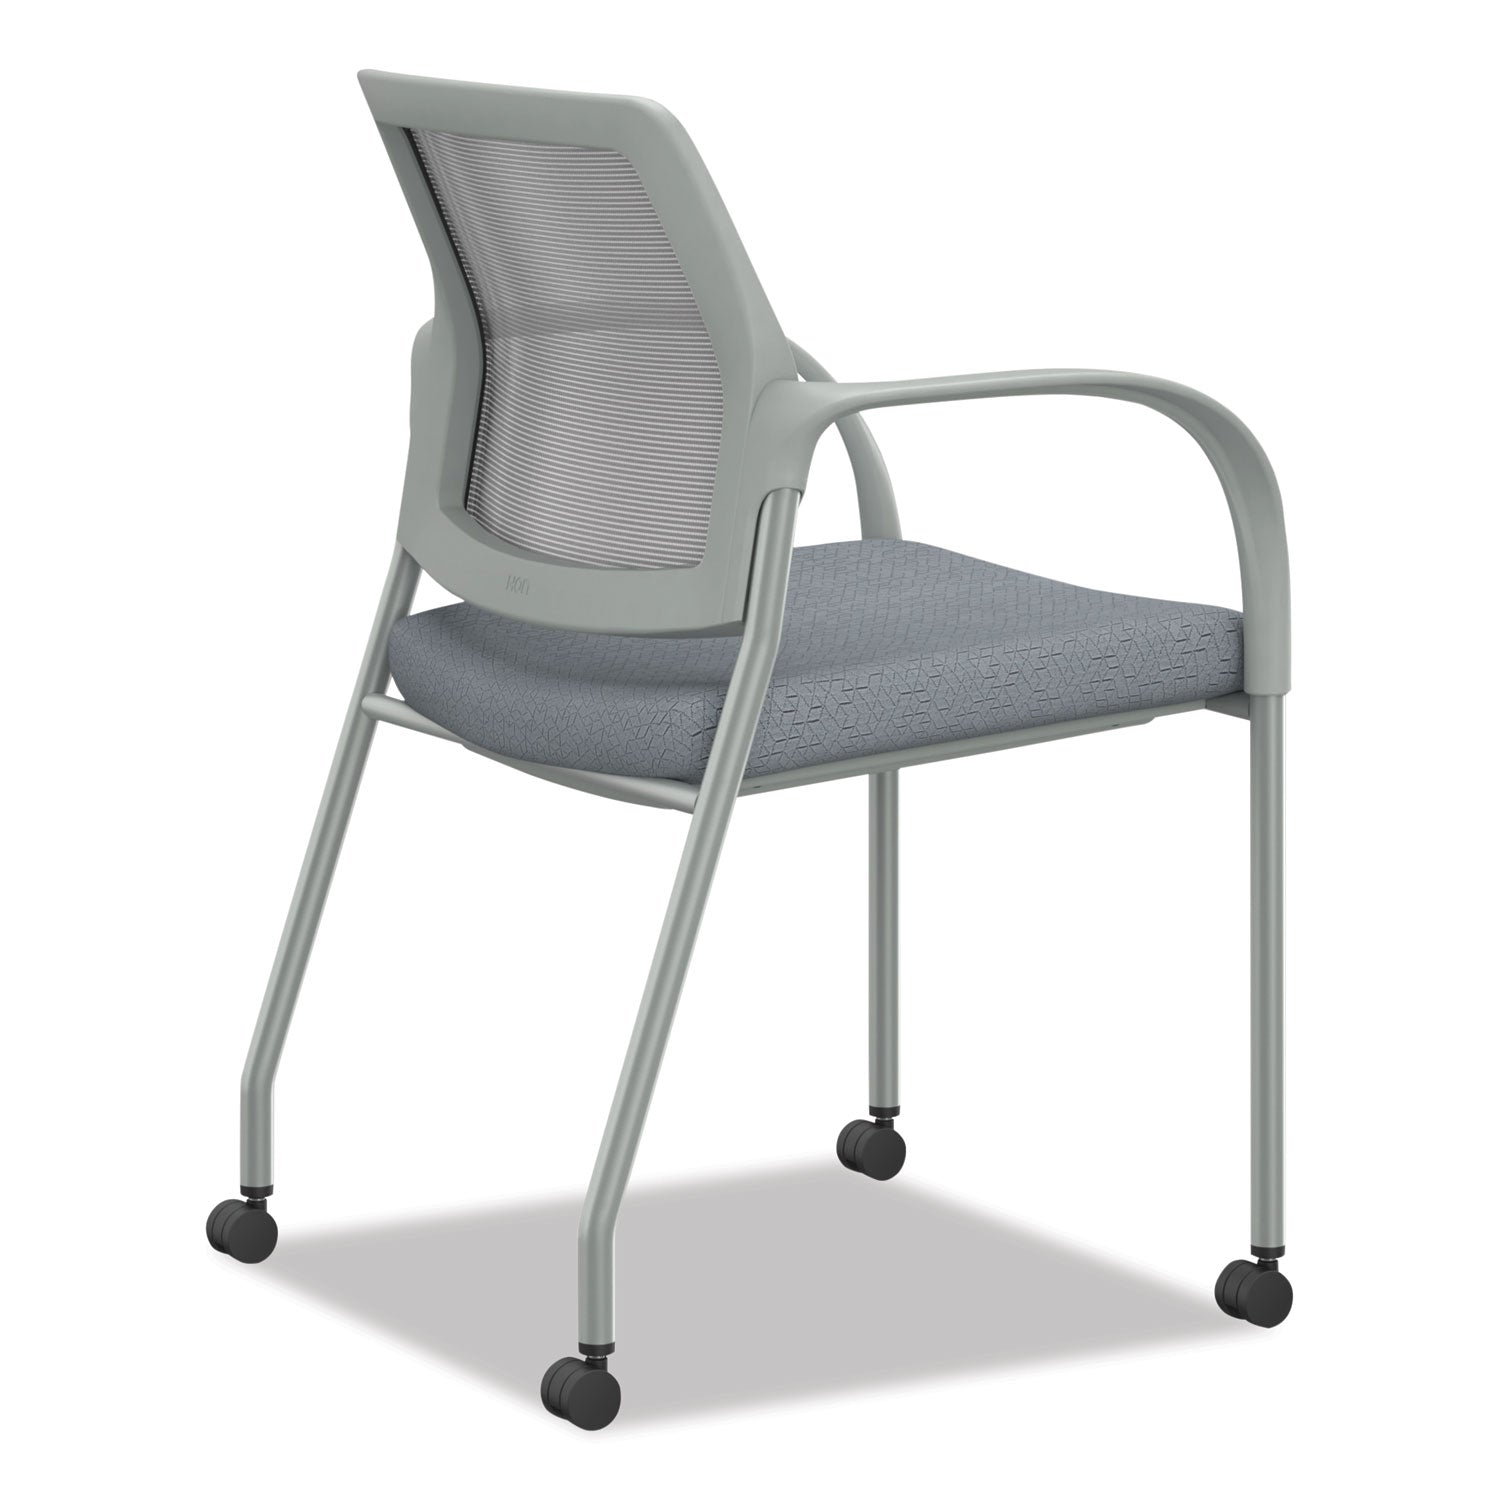 ignition-series-mesh-back-mobile-stacking-chair-25-x-2175-x-335-basalt-fog-textured-silver-base-ships-in-7-10-bus-days_honi2s6fhfa258t - 4